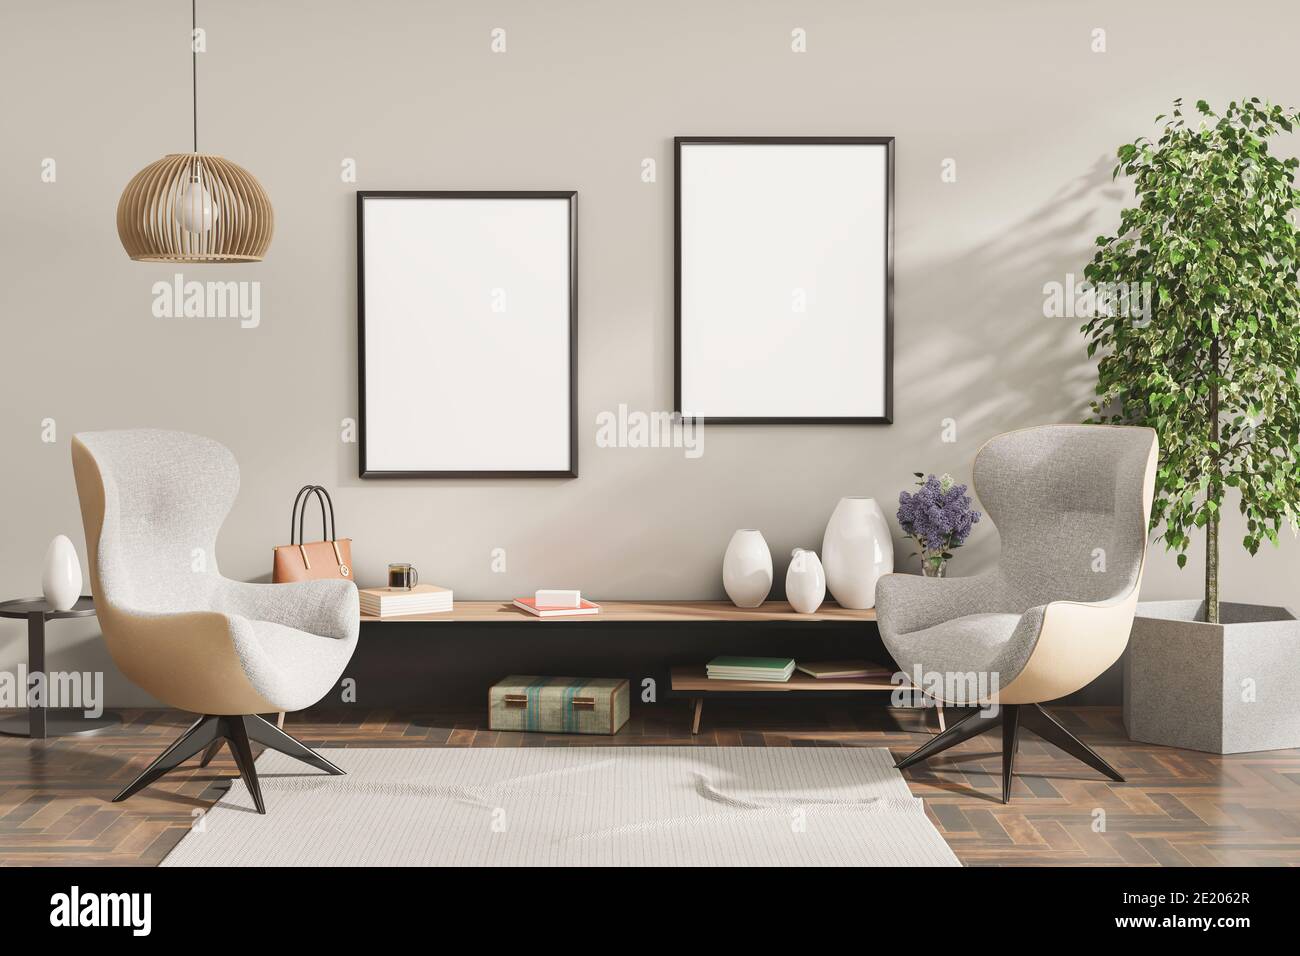 Mock up frame in home interior background, living room with natural furniture, Scandinavian style 3d illustration Stock Photo